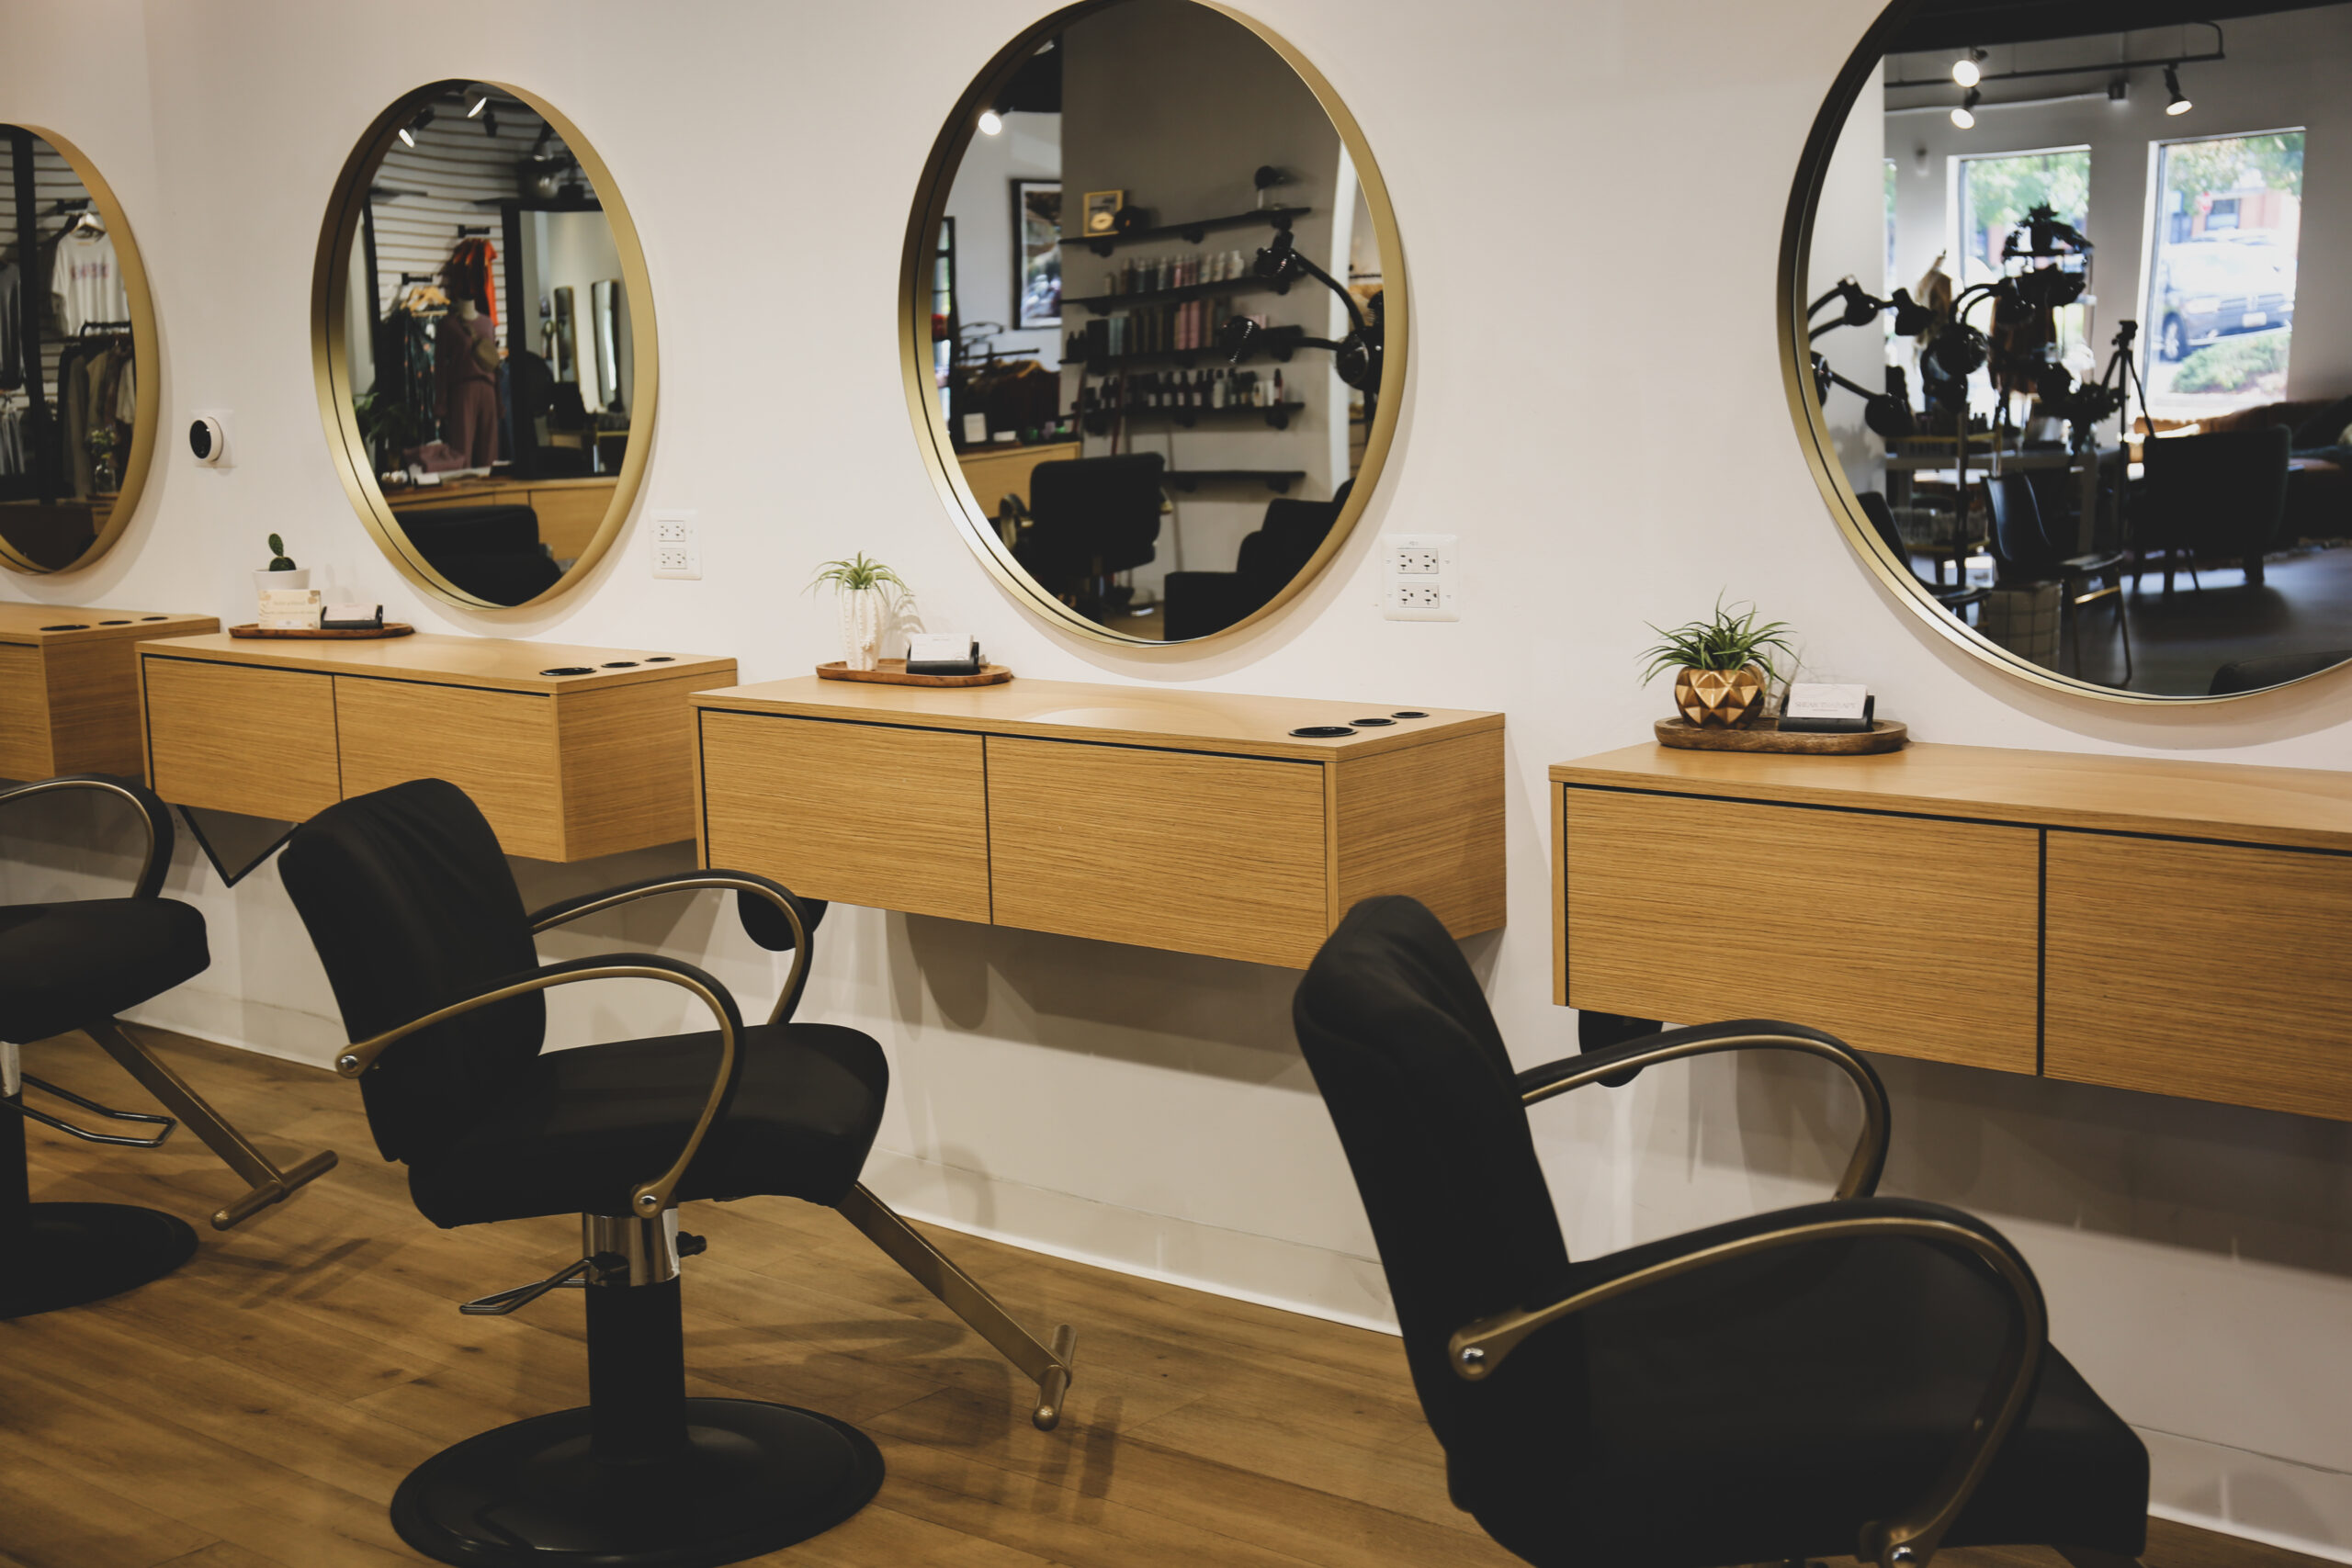 Salon background showing styling chairs by Kaemark